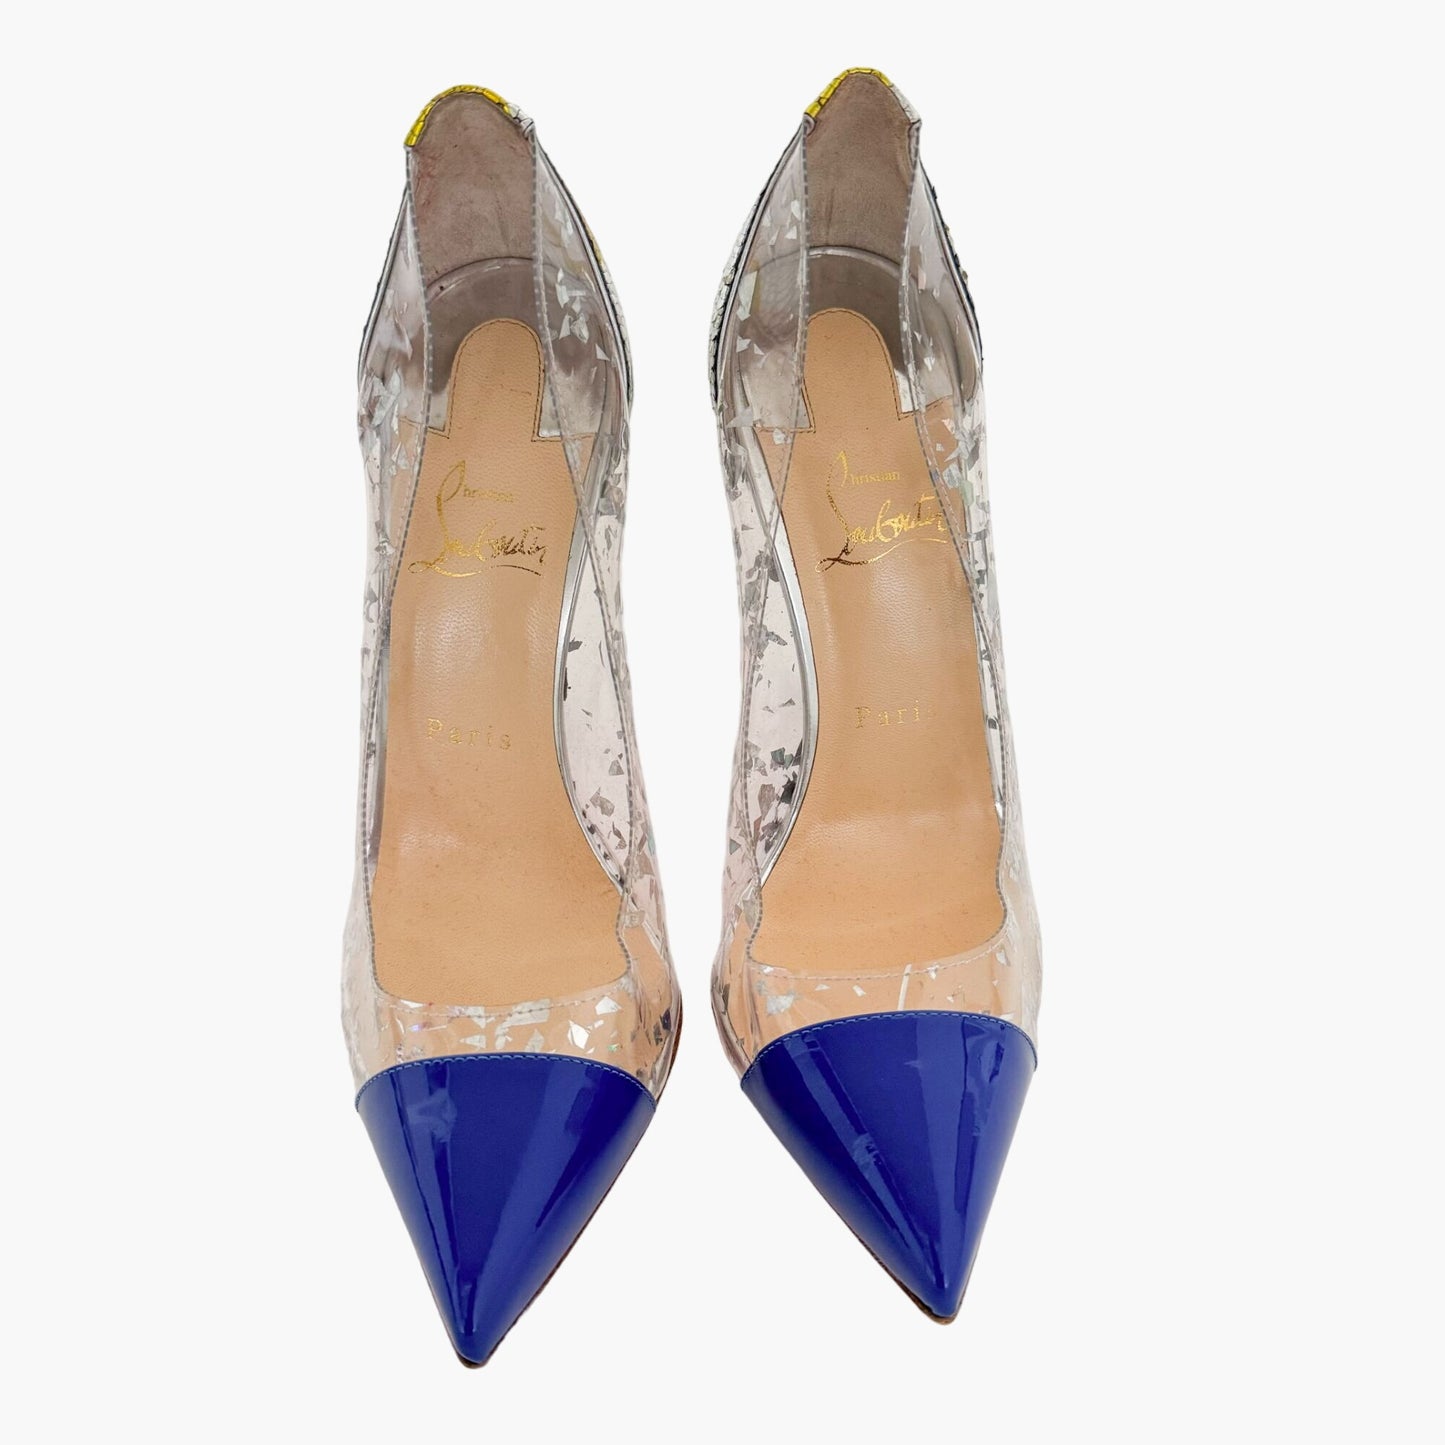 Christian Louboutin Debout 120 Pumps in Blue Patent, PVC and Multicolor Python Size 39.5